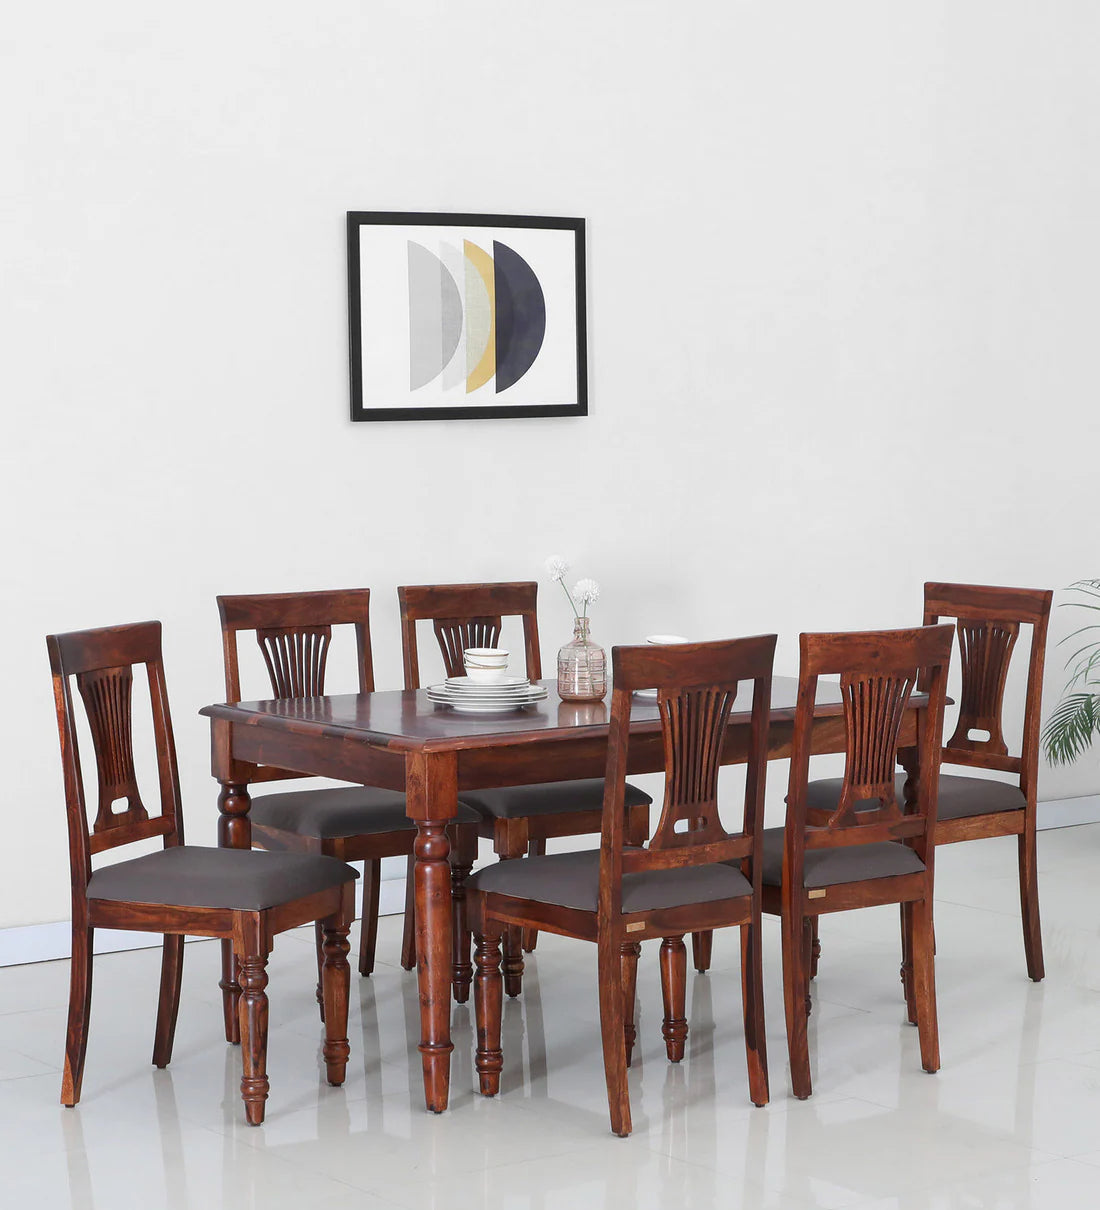 Sheerel Solid Wood 6 Seater Dining Set With Brown Floral Upholstery Chair In Honey Oak Finish - By Rajwada - Rajwada Furnish